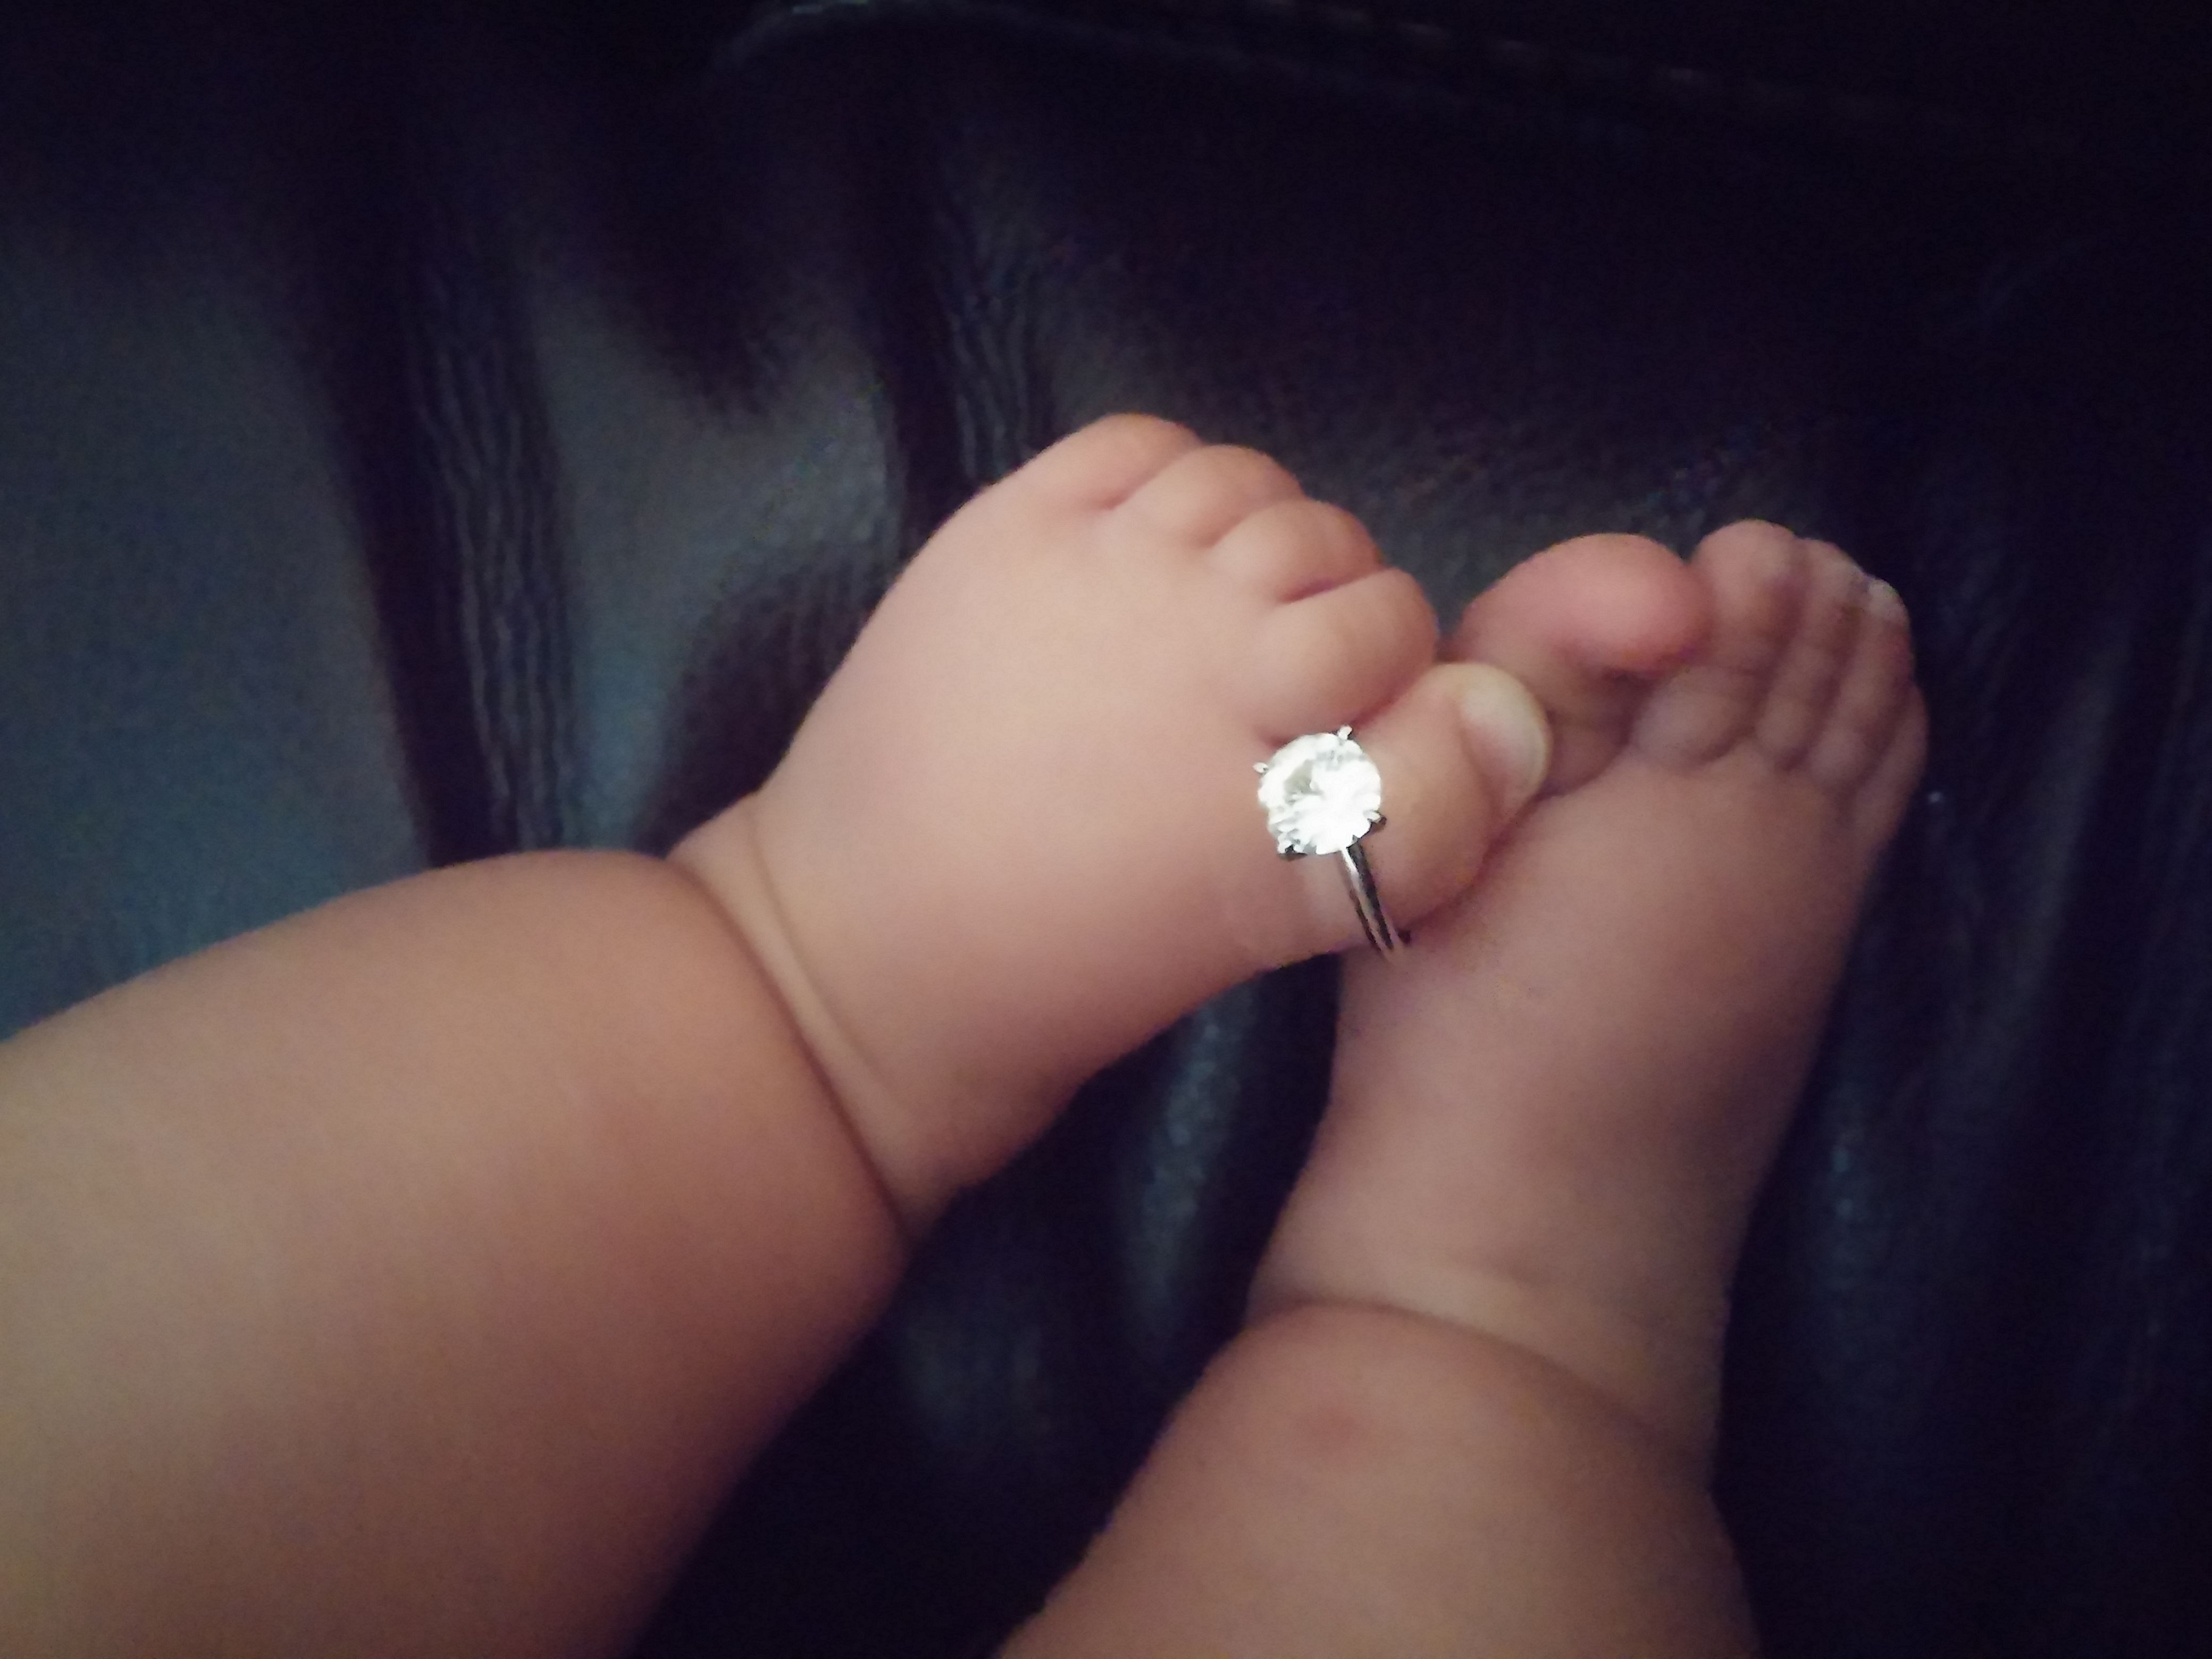 Baby Hands/feet With Regard To 2018 Etiquette Toe Rings (Gallery 10 of 15)